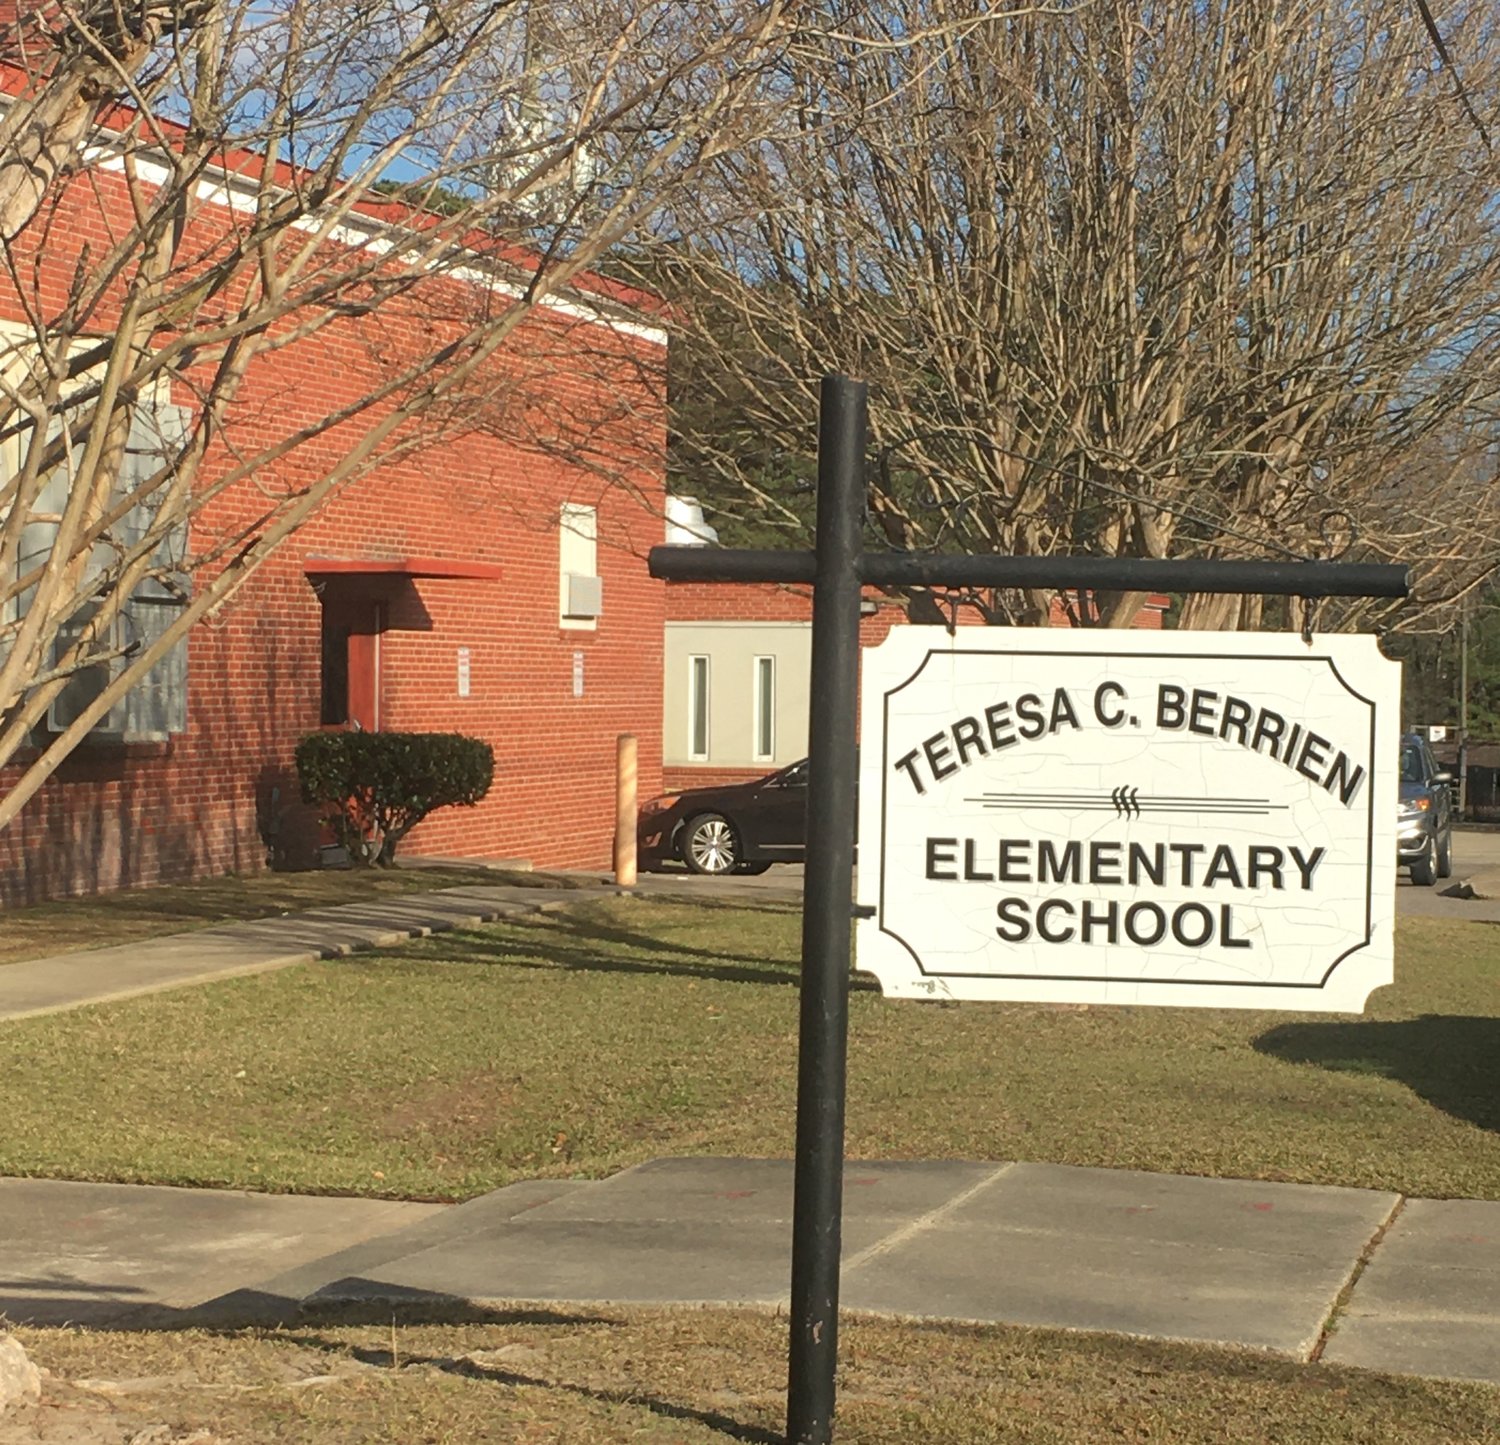 A school board committee on Tuesday recommended closing T.C. Berrien Elementary School.